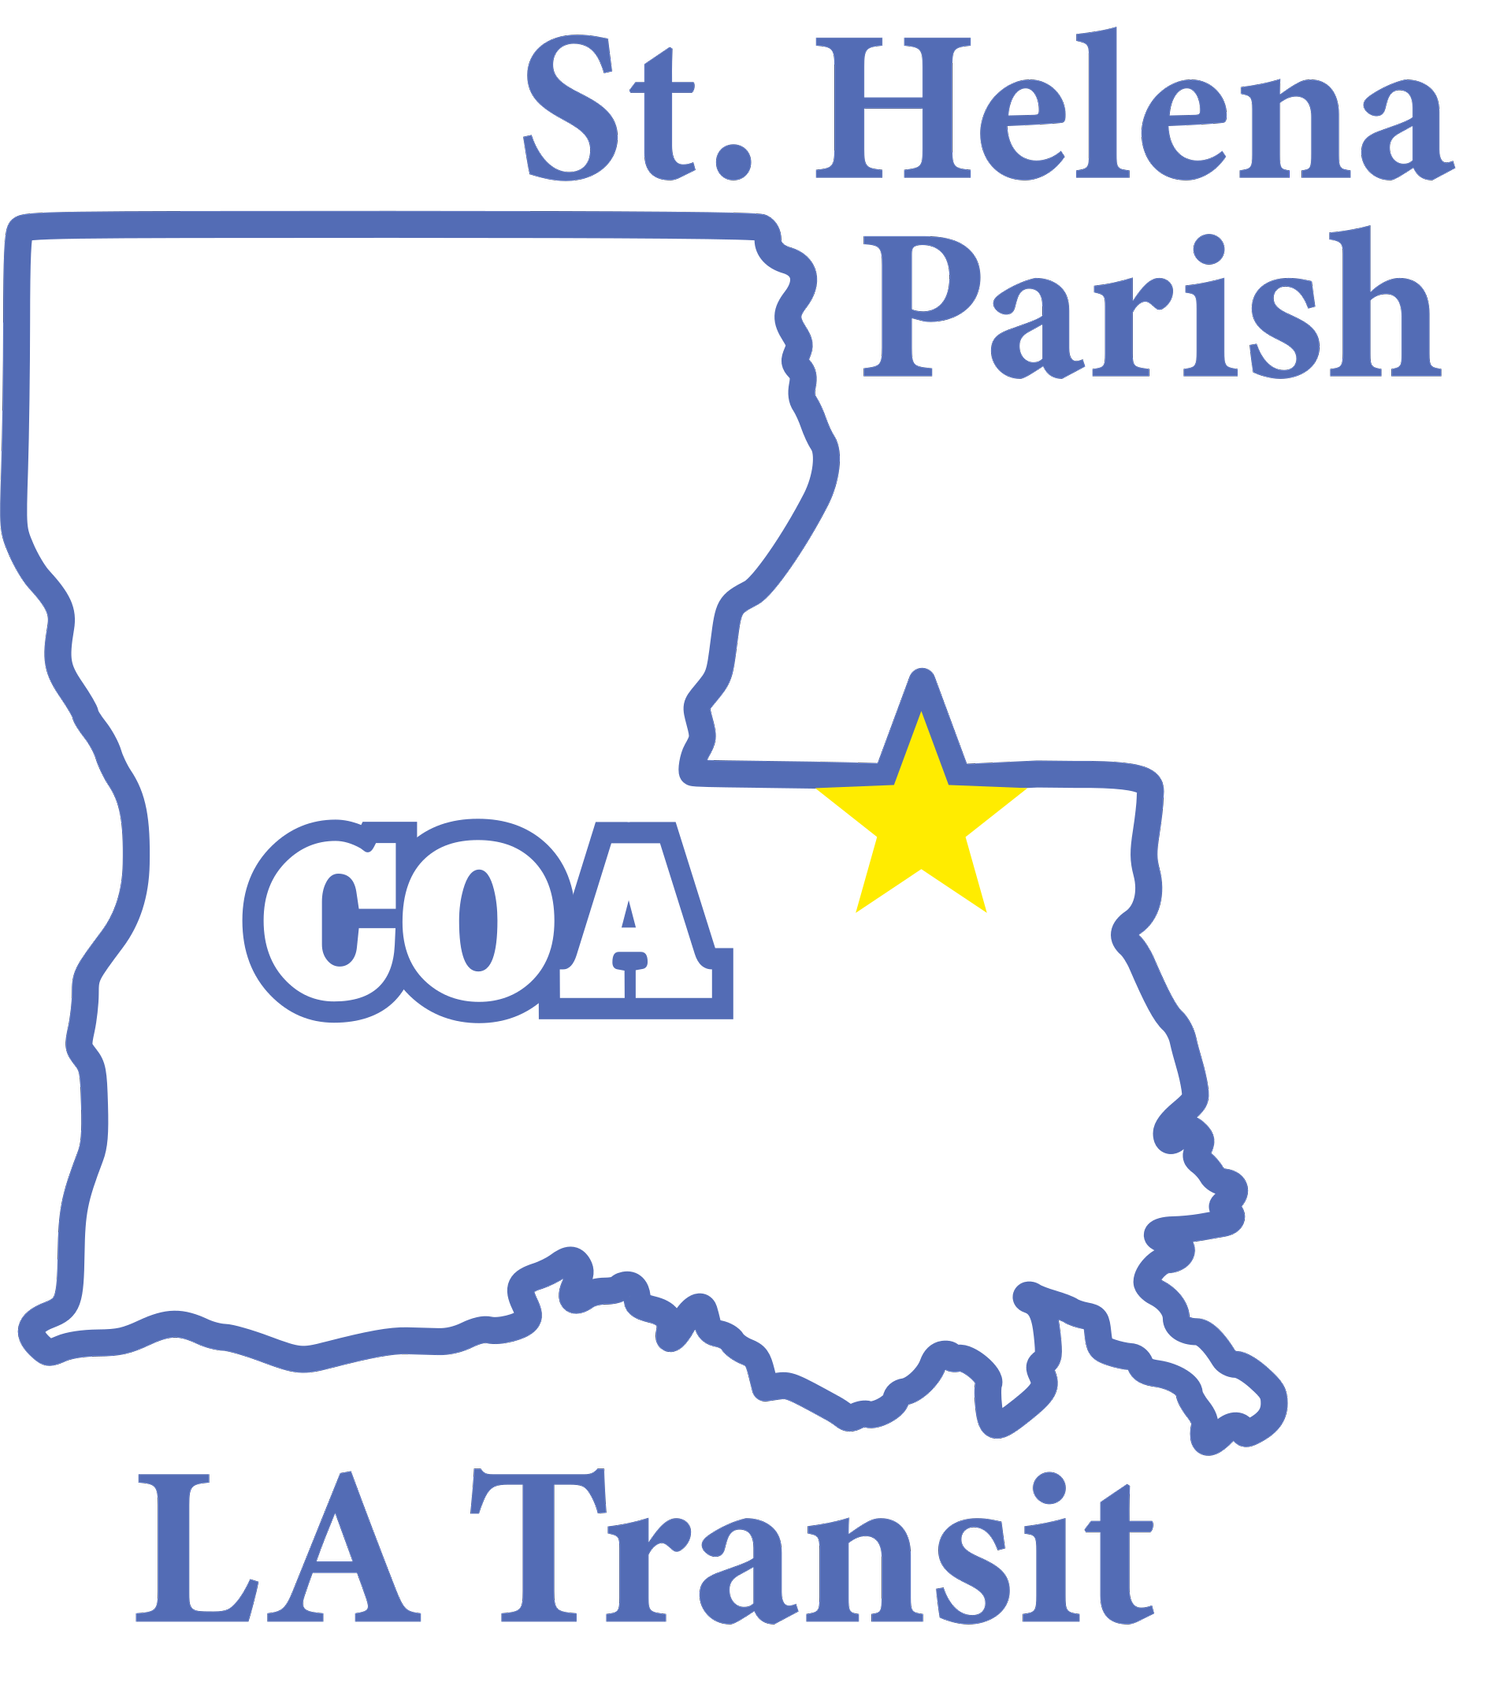 St. Helena Parish Council on Aging